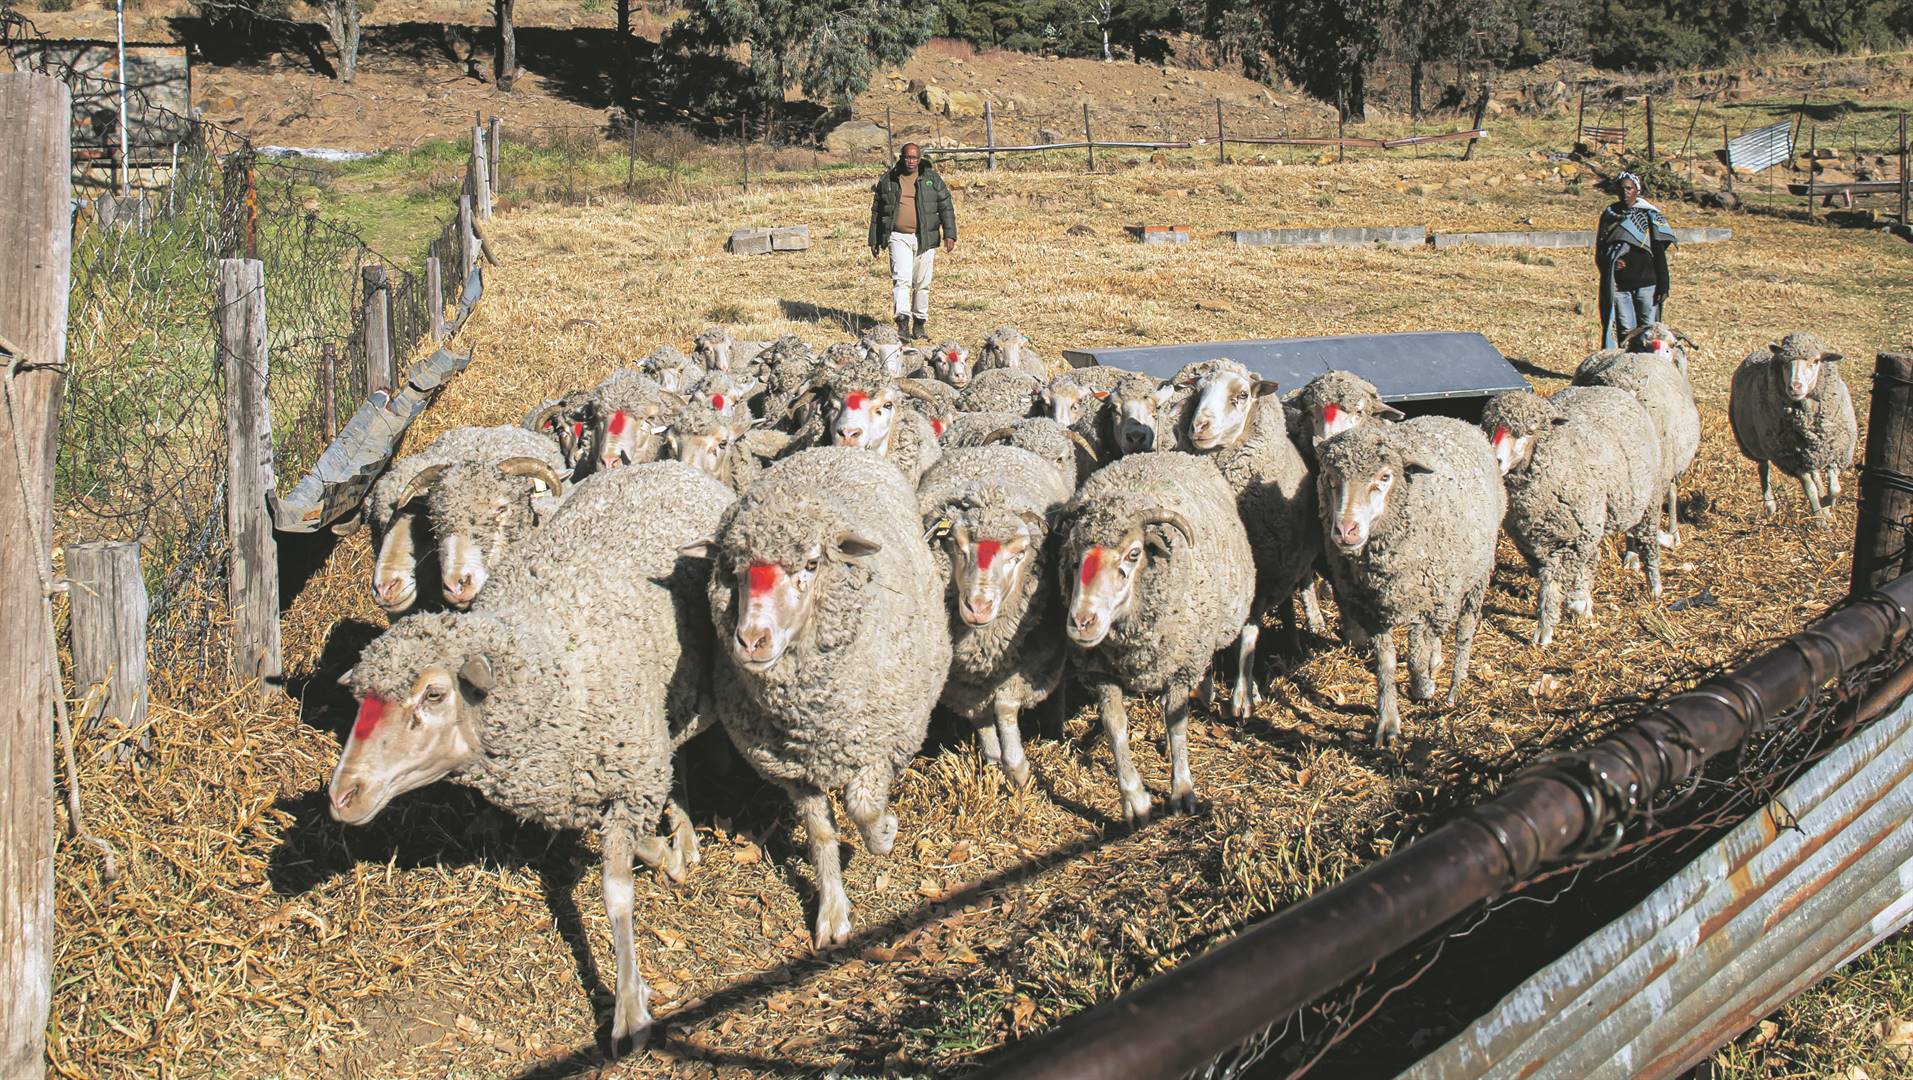 A sheep farmer herds his flock. The price of lamb and mutton may be higher in stores, but farmers are not seeing the profit. Photo: Deon Raath